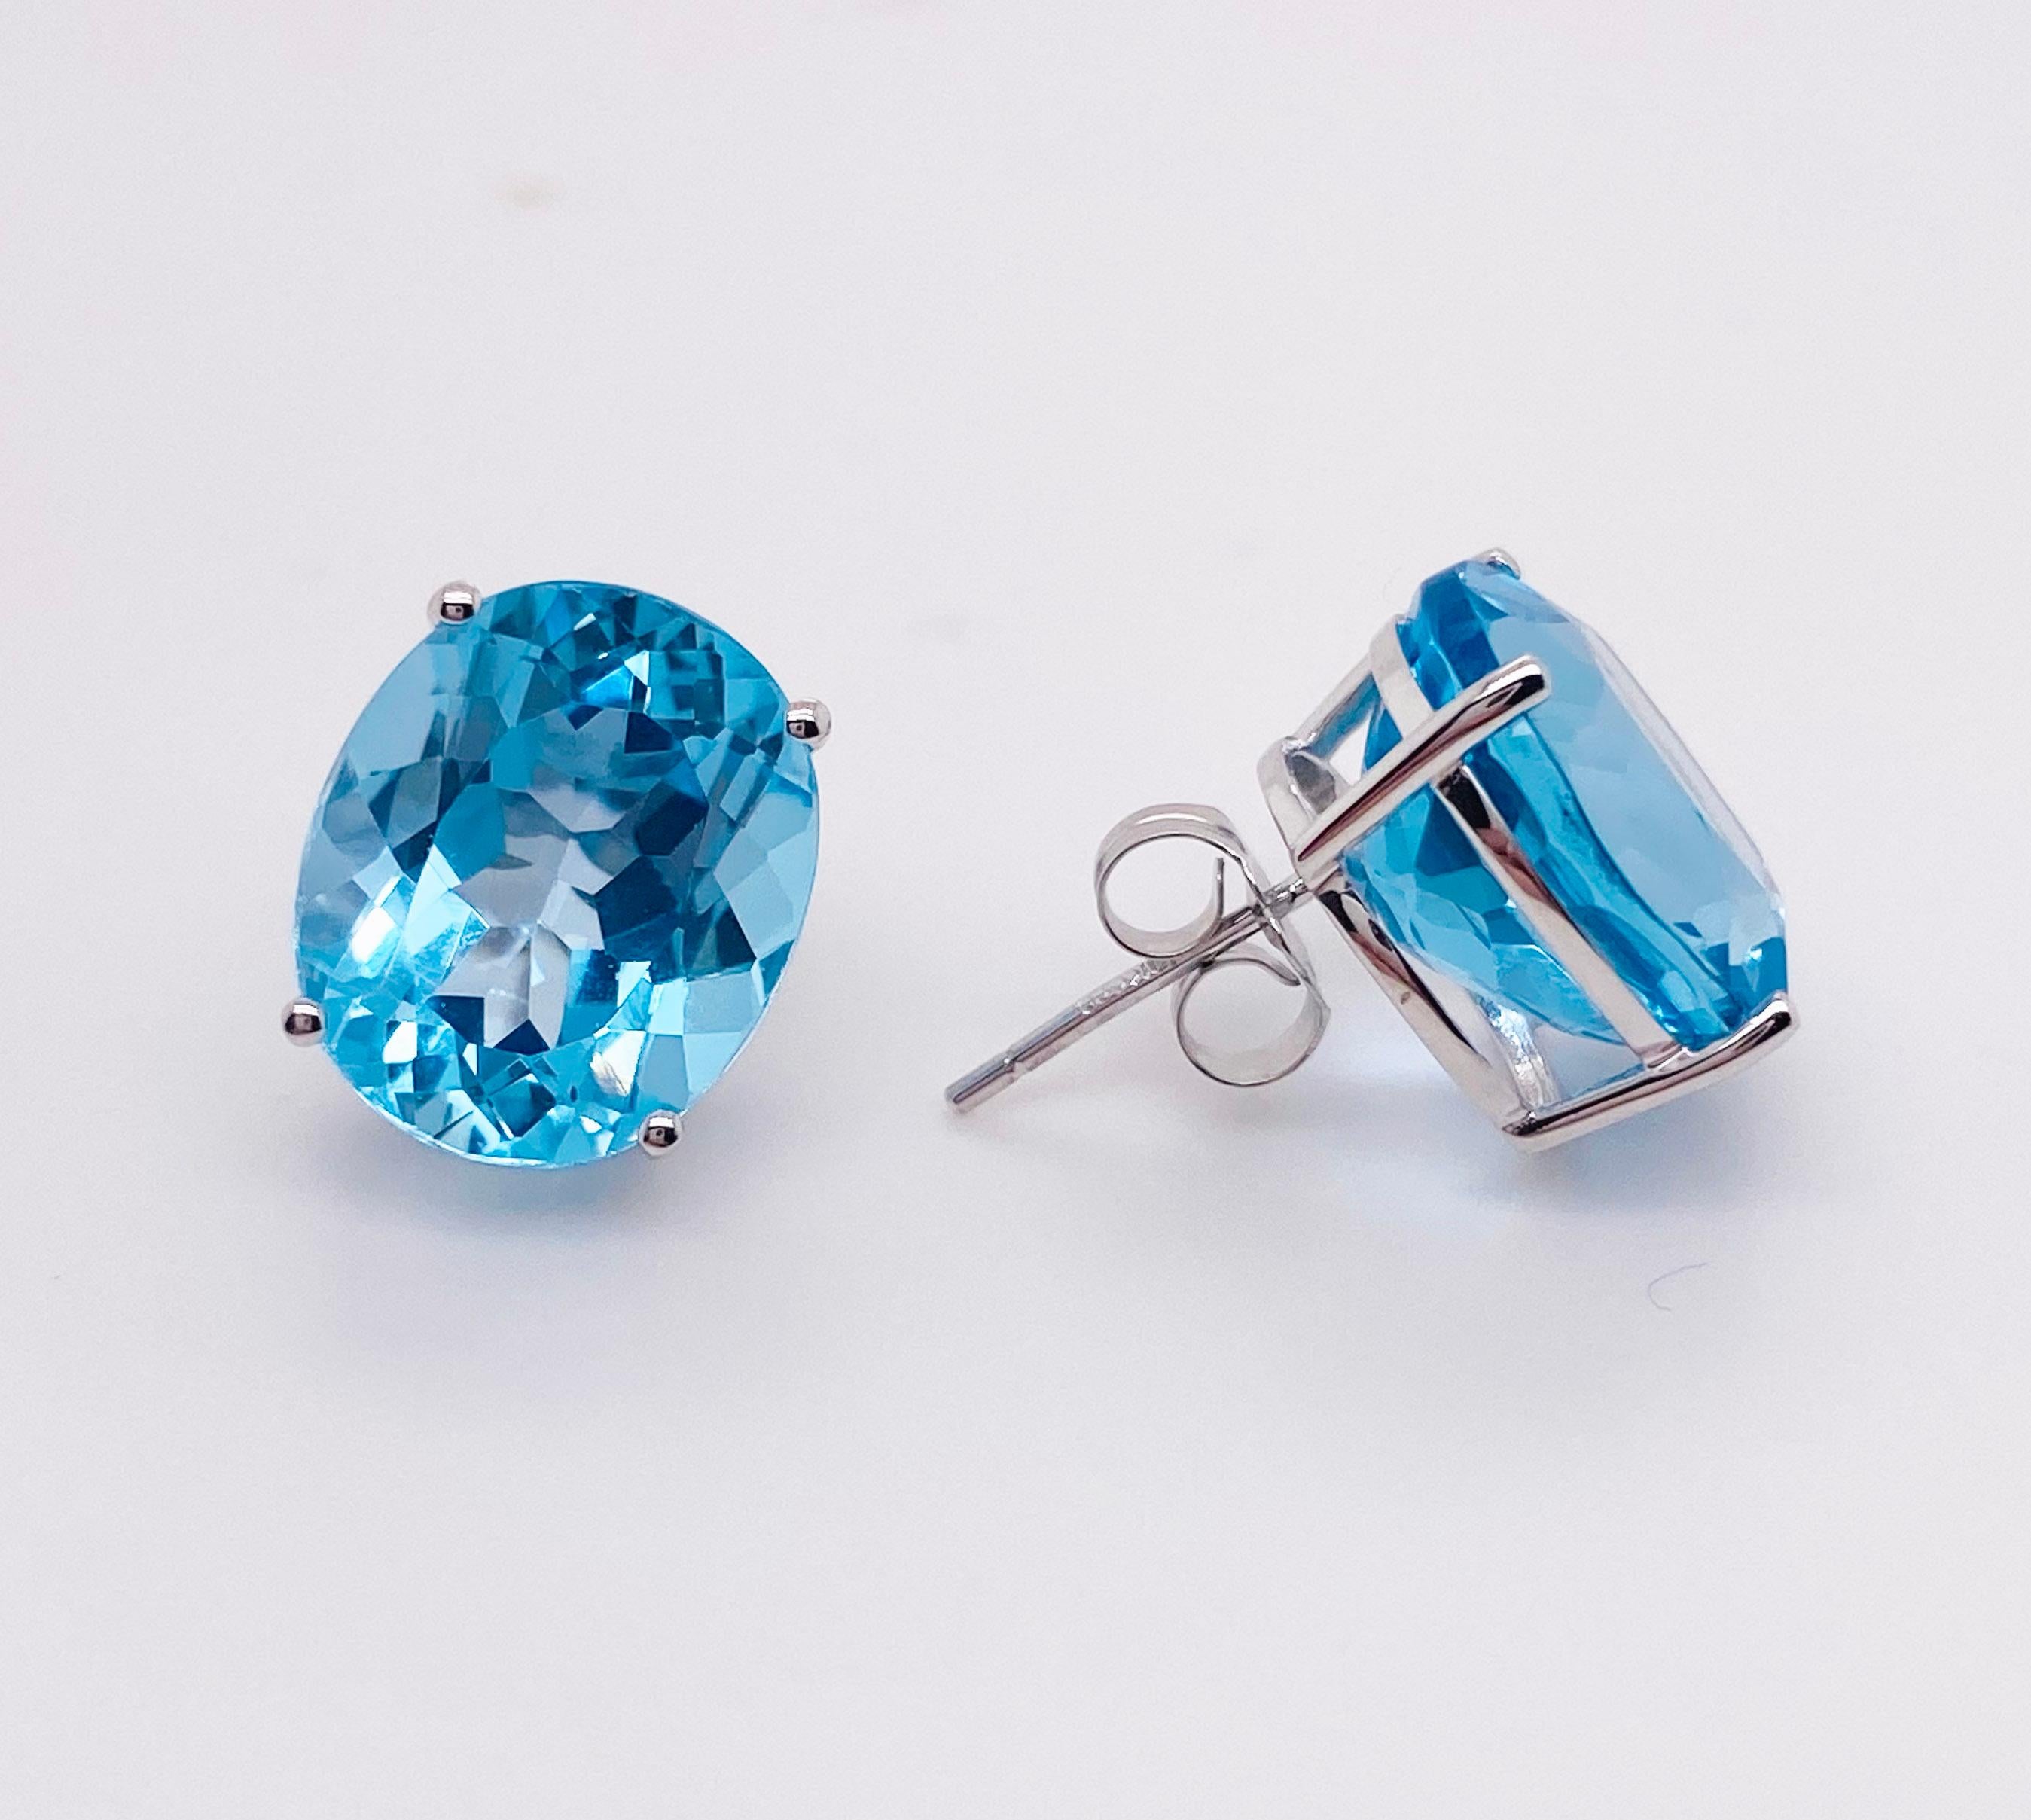 These oval Swiss blue topaz earrings are significant in size weighing 11.80 carats total weight! We pride ourselves in procuring the most beautiful blue topaz sourced ethically. These earrings make a great statement and the color blue looks good on